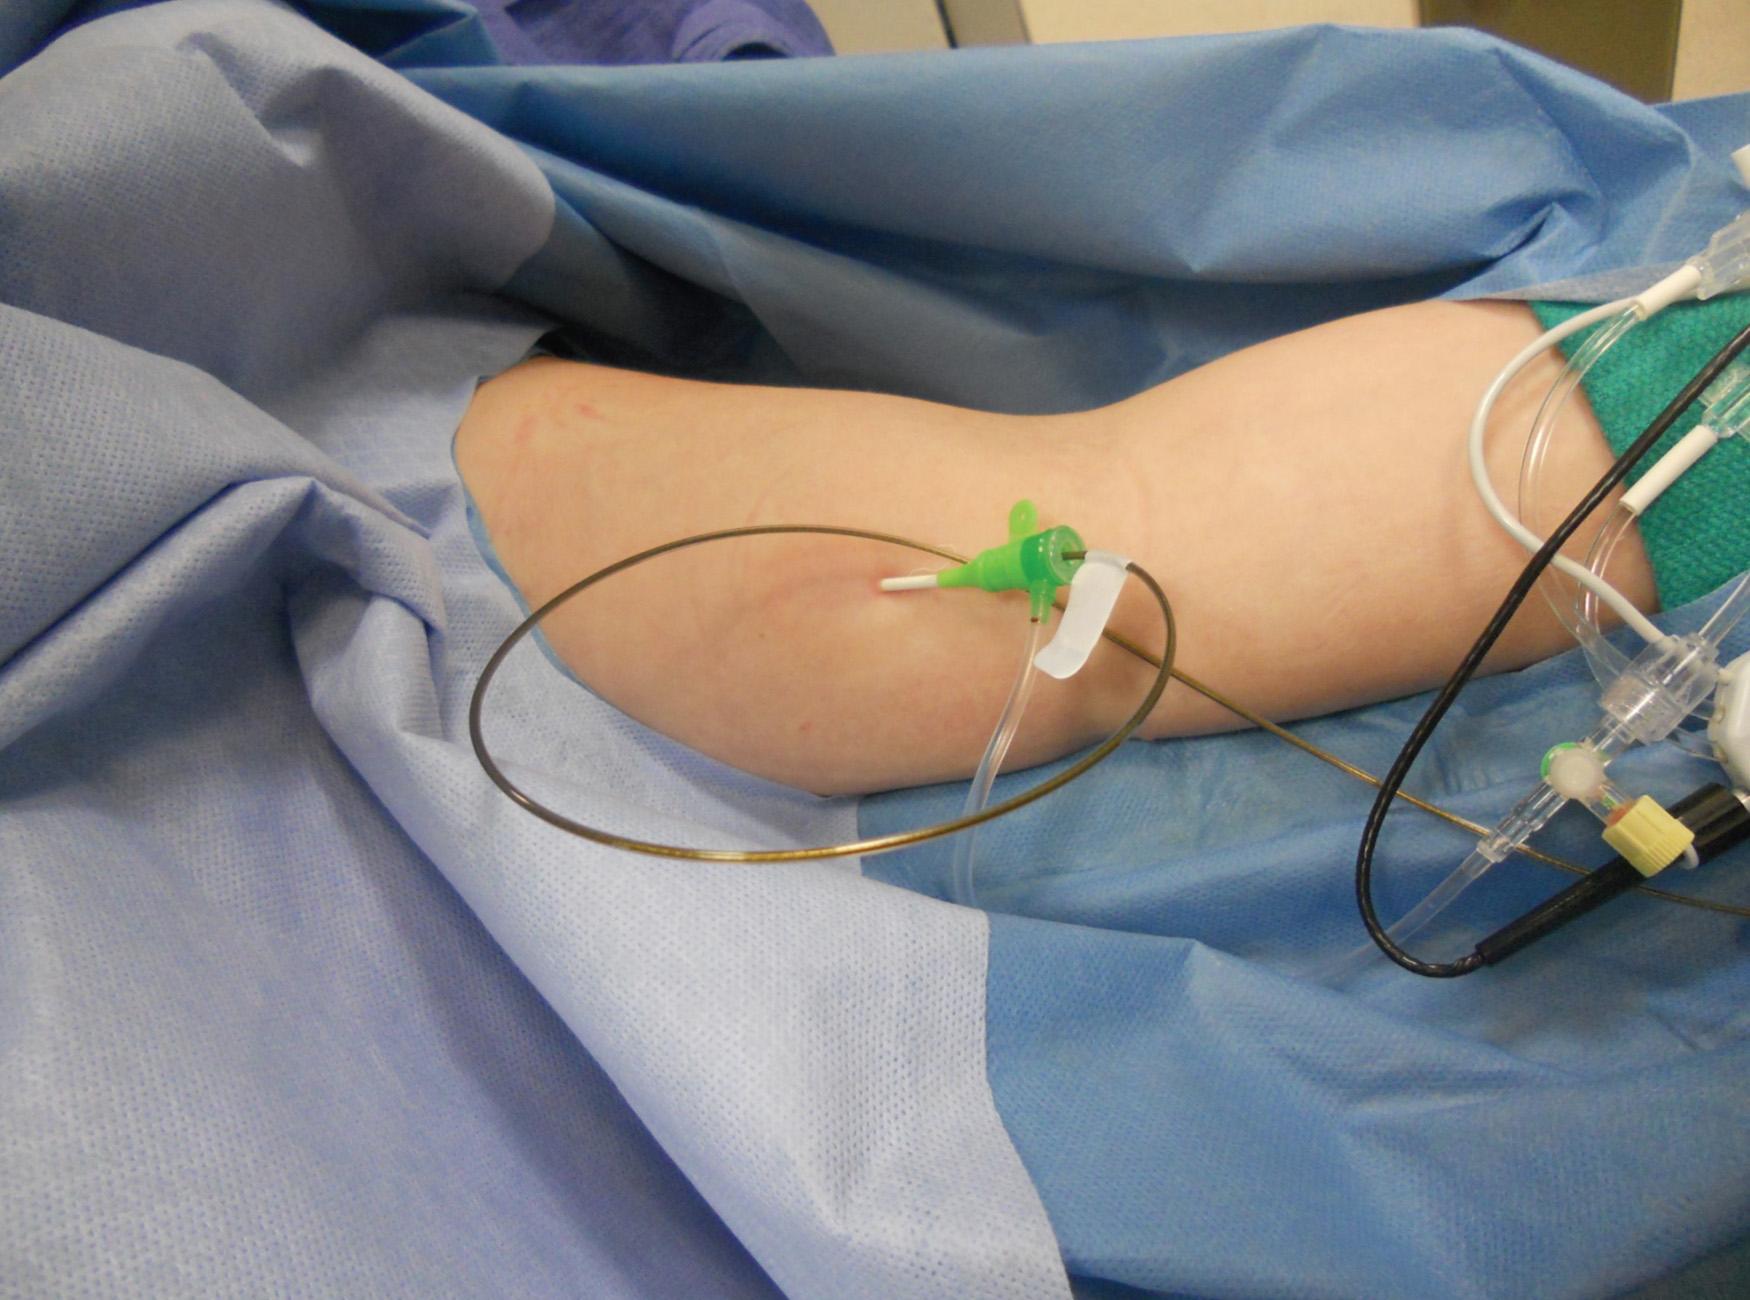 Fig. 24.6, Image demonstrating a 6-Fr sheath in the brachial vein with an EKOS infusion catheter through the sheath. This patient received 0.5 mg per hour of r-tPA (alteplase; Genentech, San Francisco, CA) infused via the EKOS catheter and 300 units per hour of heparin via the sheath.